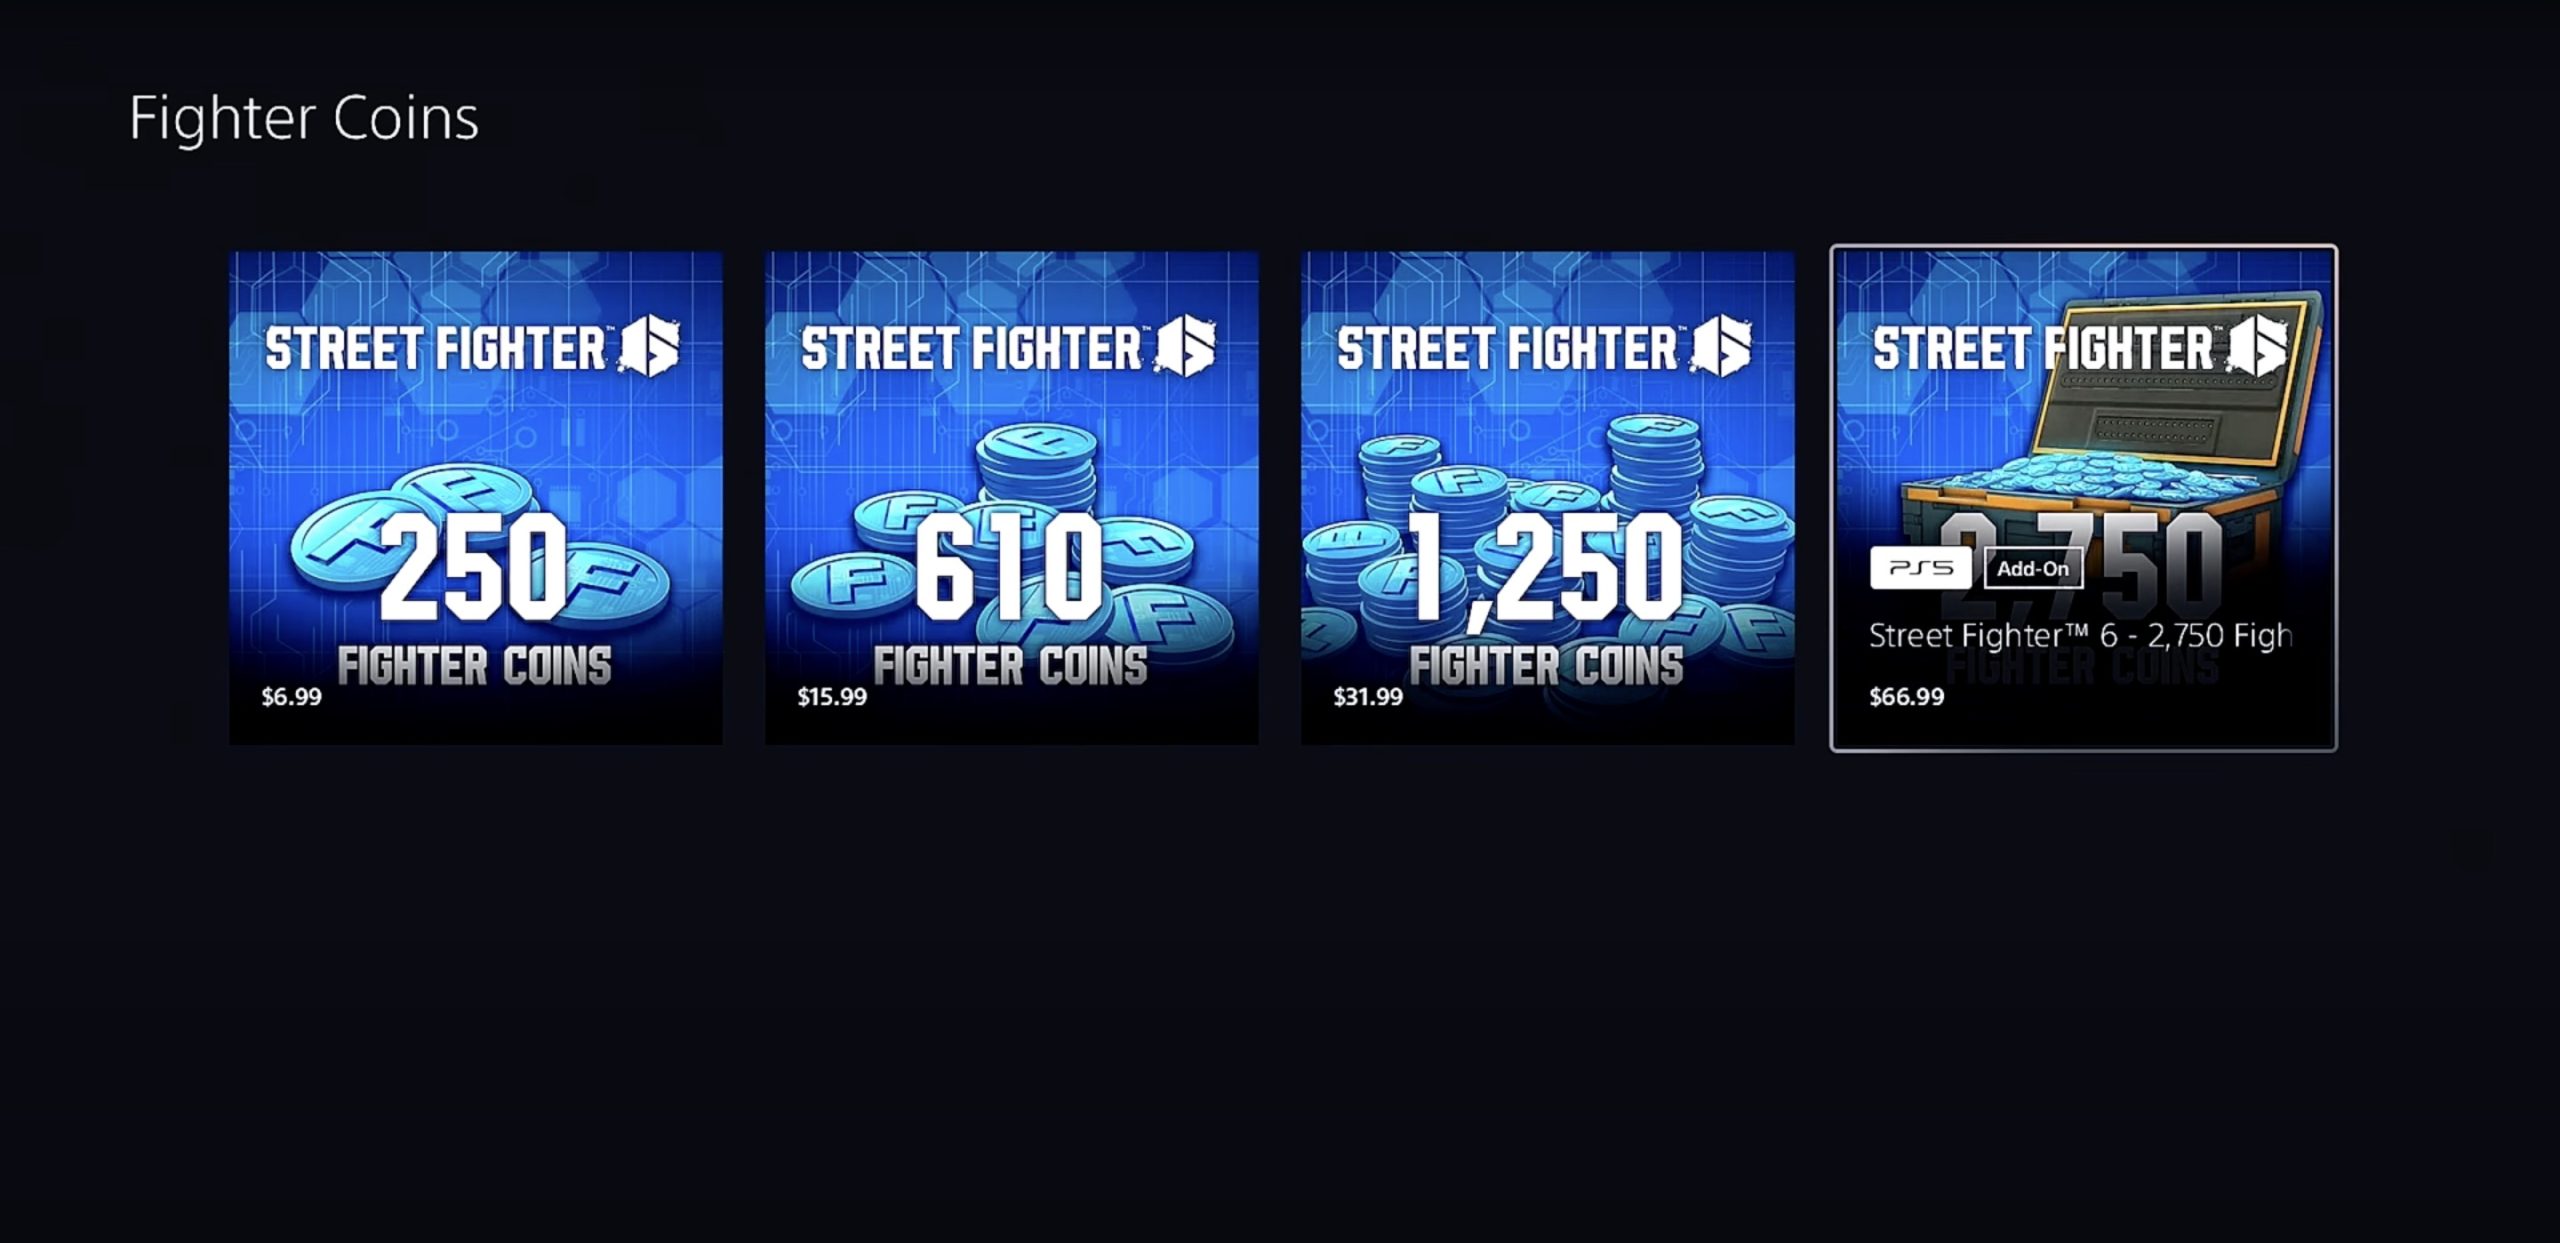 cost of fighter coins